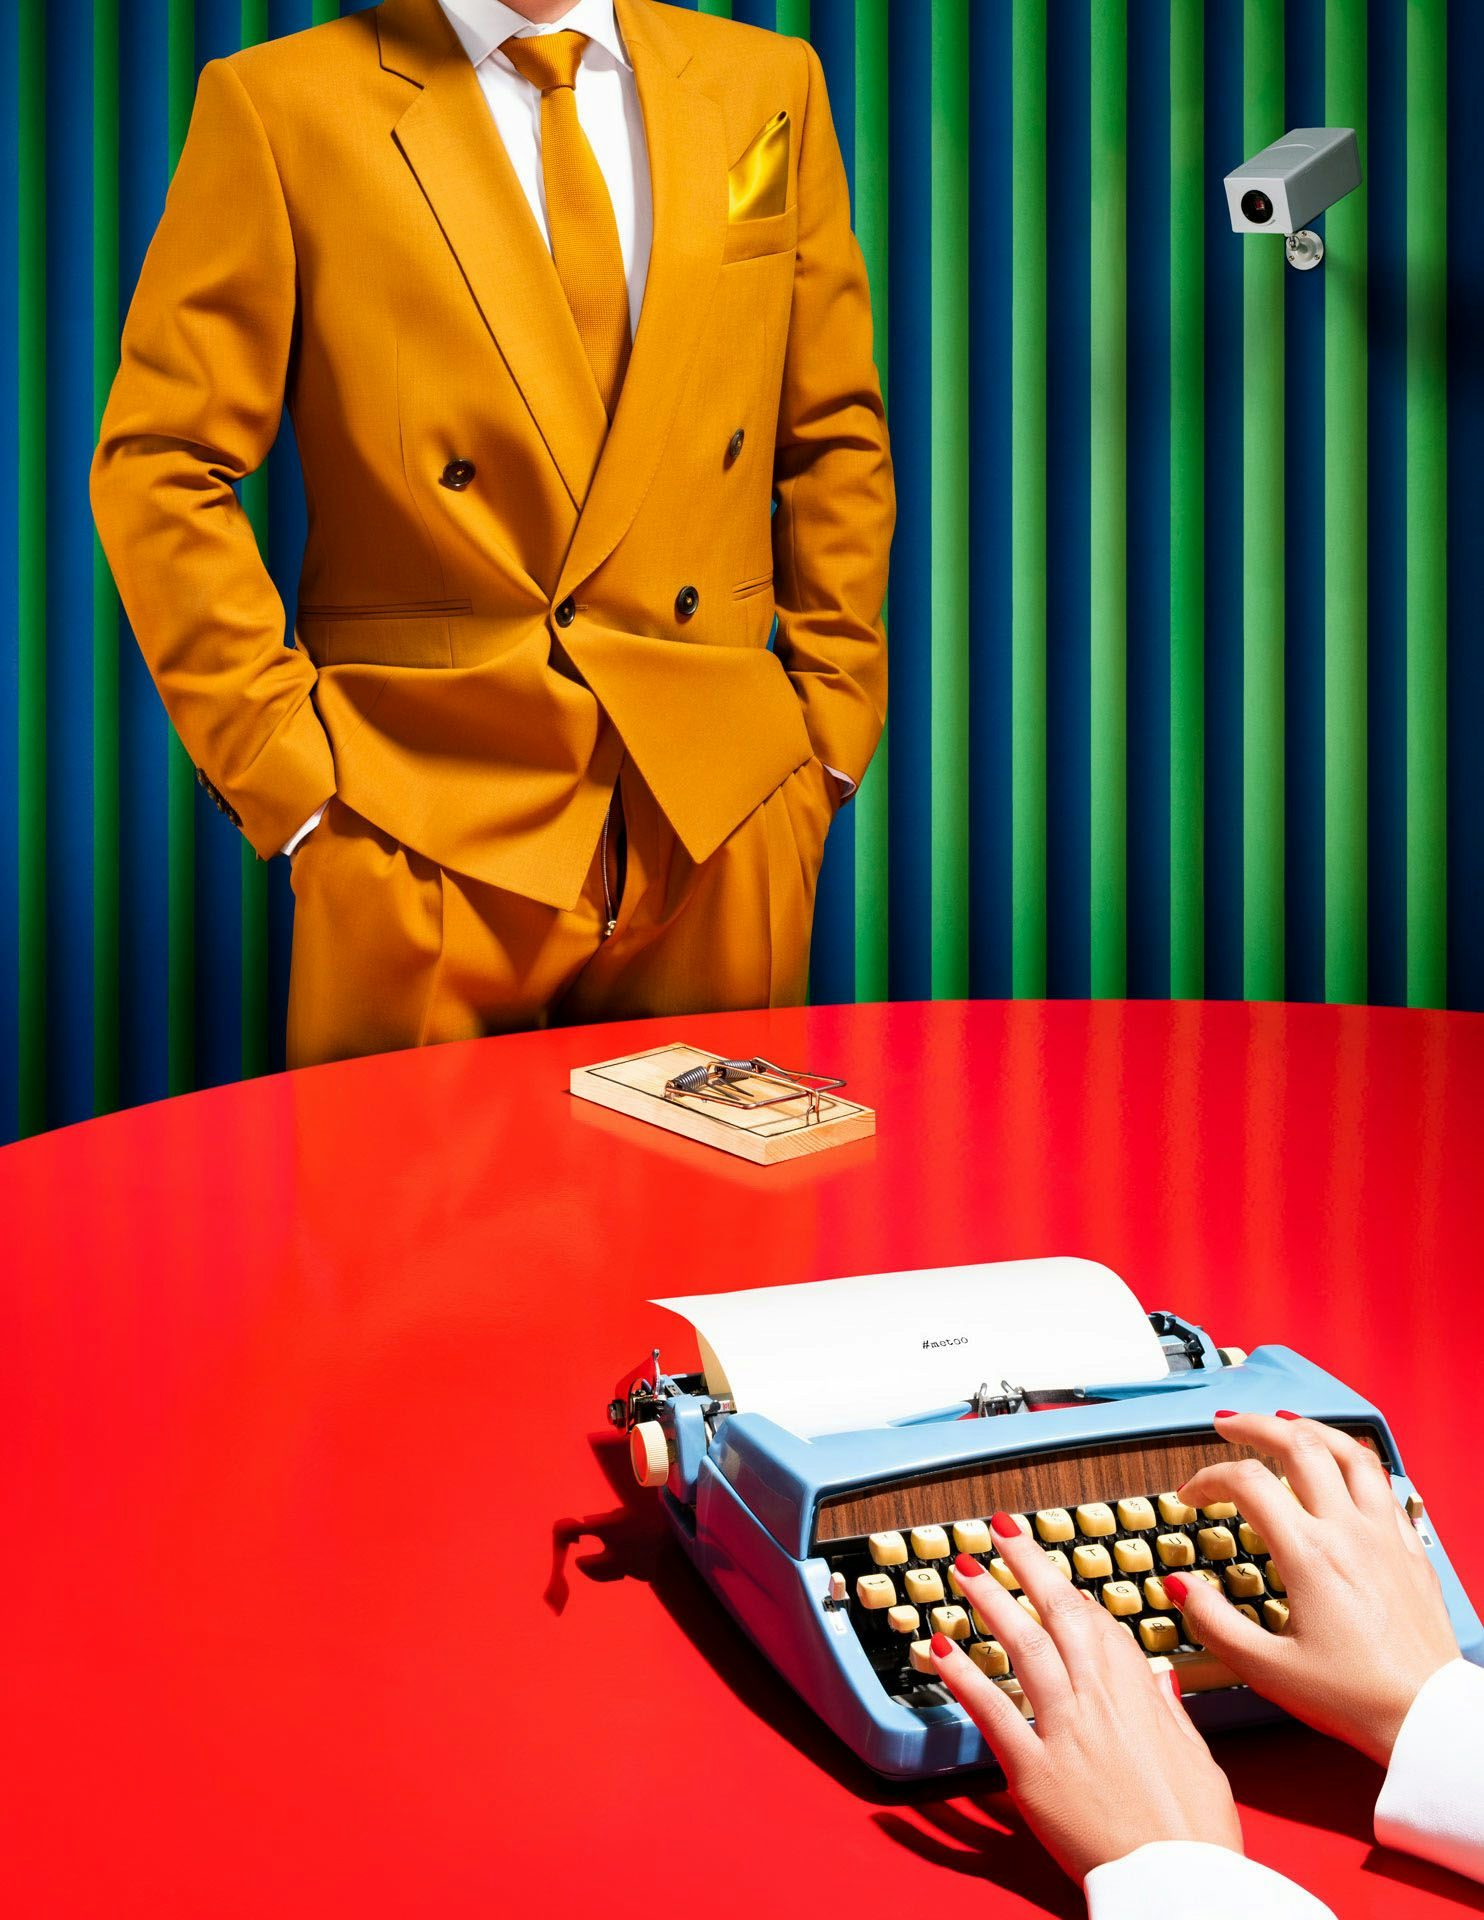 A headless figure in a bright orange suit stands before a green and blue striped wall, with a close-up of hands typing on a vintage typewriter on a red table.